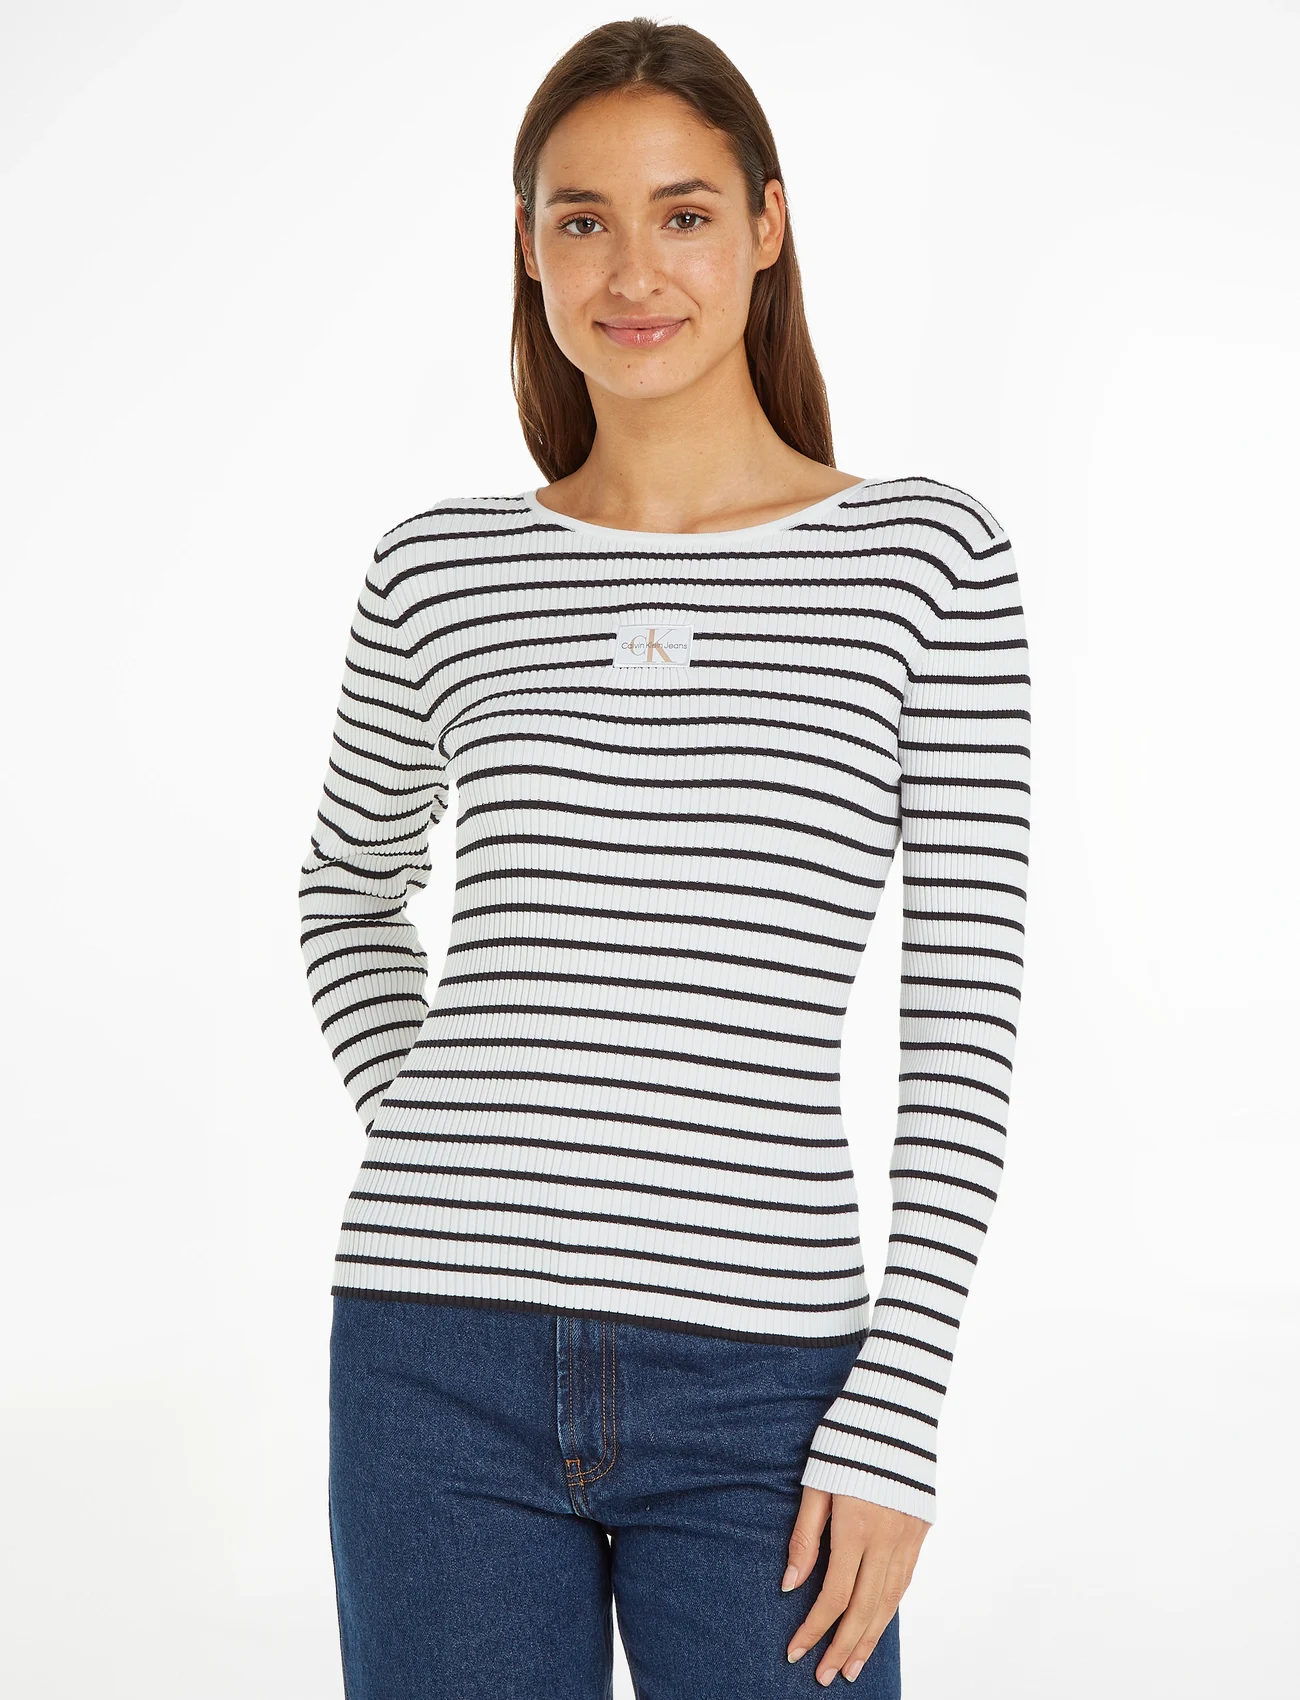 Calvin Klein Jeans - WOVEN LABEL TIGHT SWEATER - long-sleeved tops - ck black / bright white striped - 0